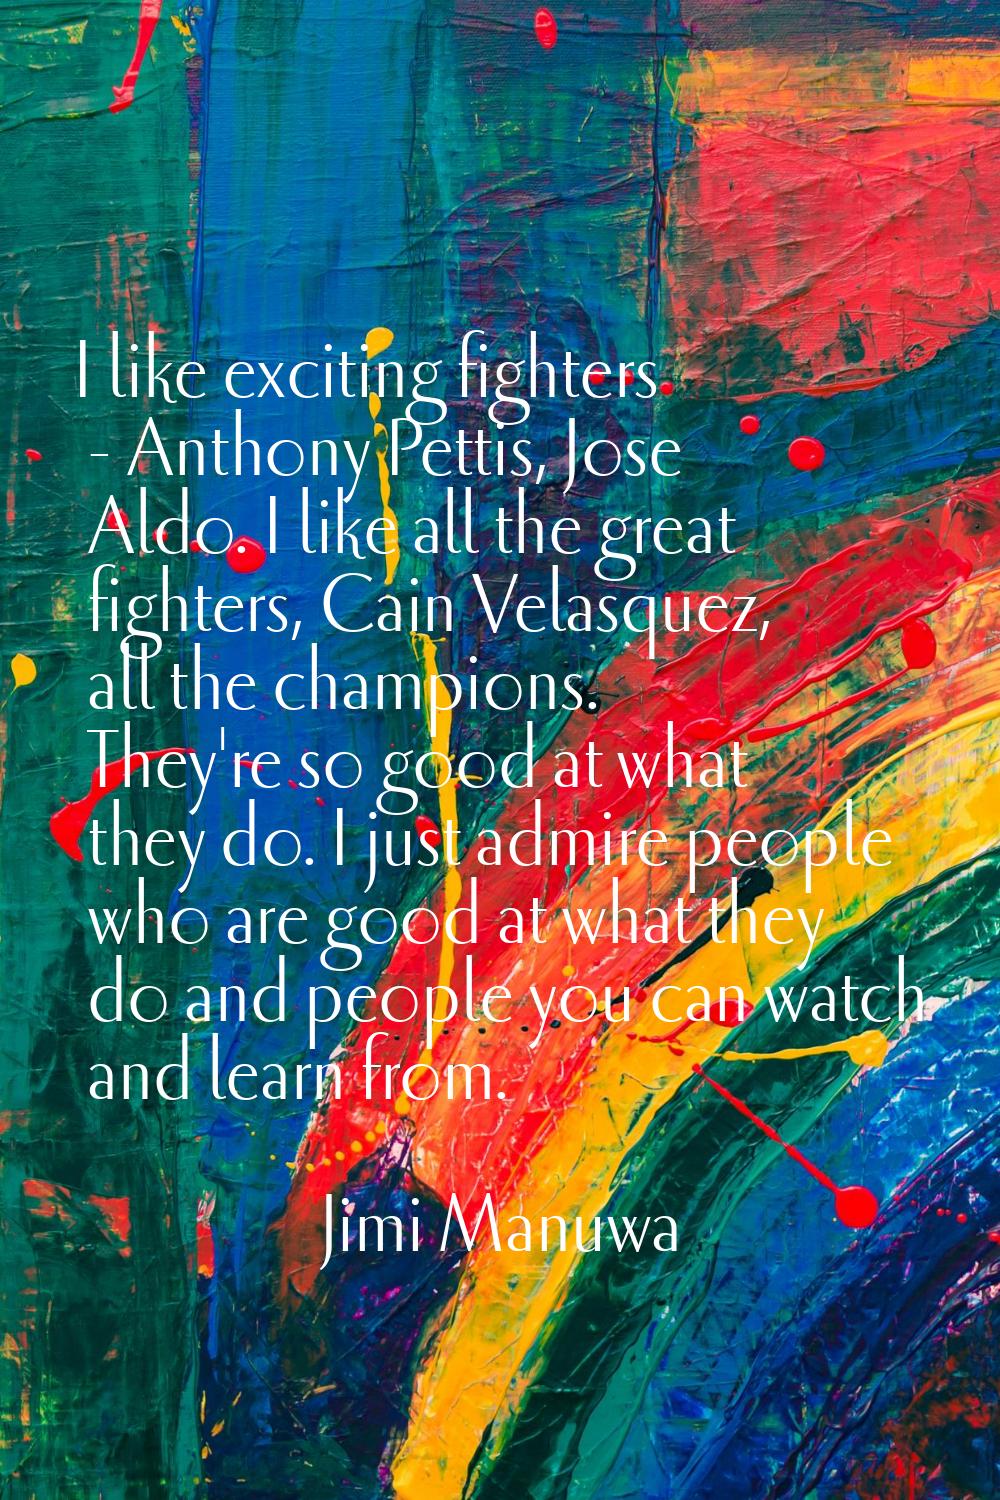 I like exciting fighters - Anthony Pettis, Jose Aldo. I like all the great fighters, Cain Velasquez